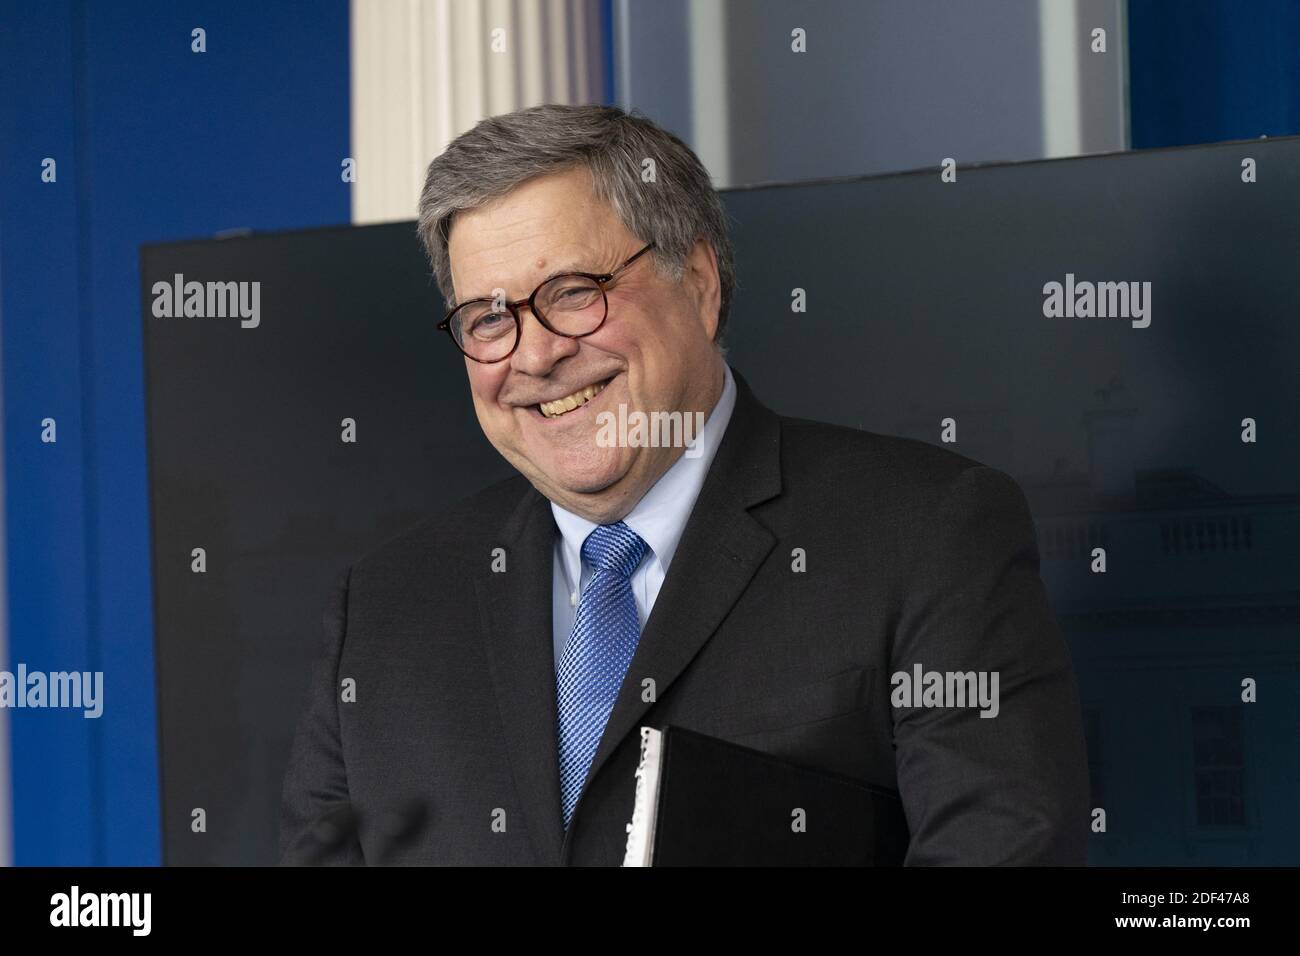 United States Attorney General William P. Barr participates in a news briefing by members of the Coronavirus Task Force at the White House on March 23, 2020 in Washington, DC, USA. Photo by Chris Kleponis/Pool/ABACAPRESS.COM Stock Photo